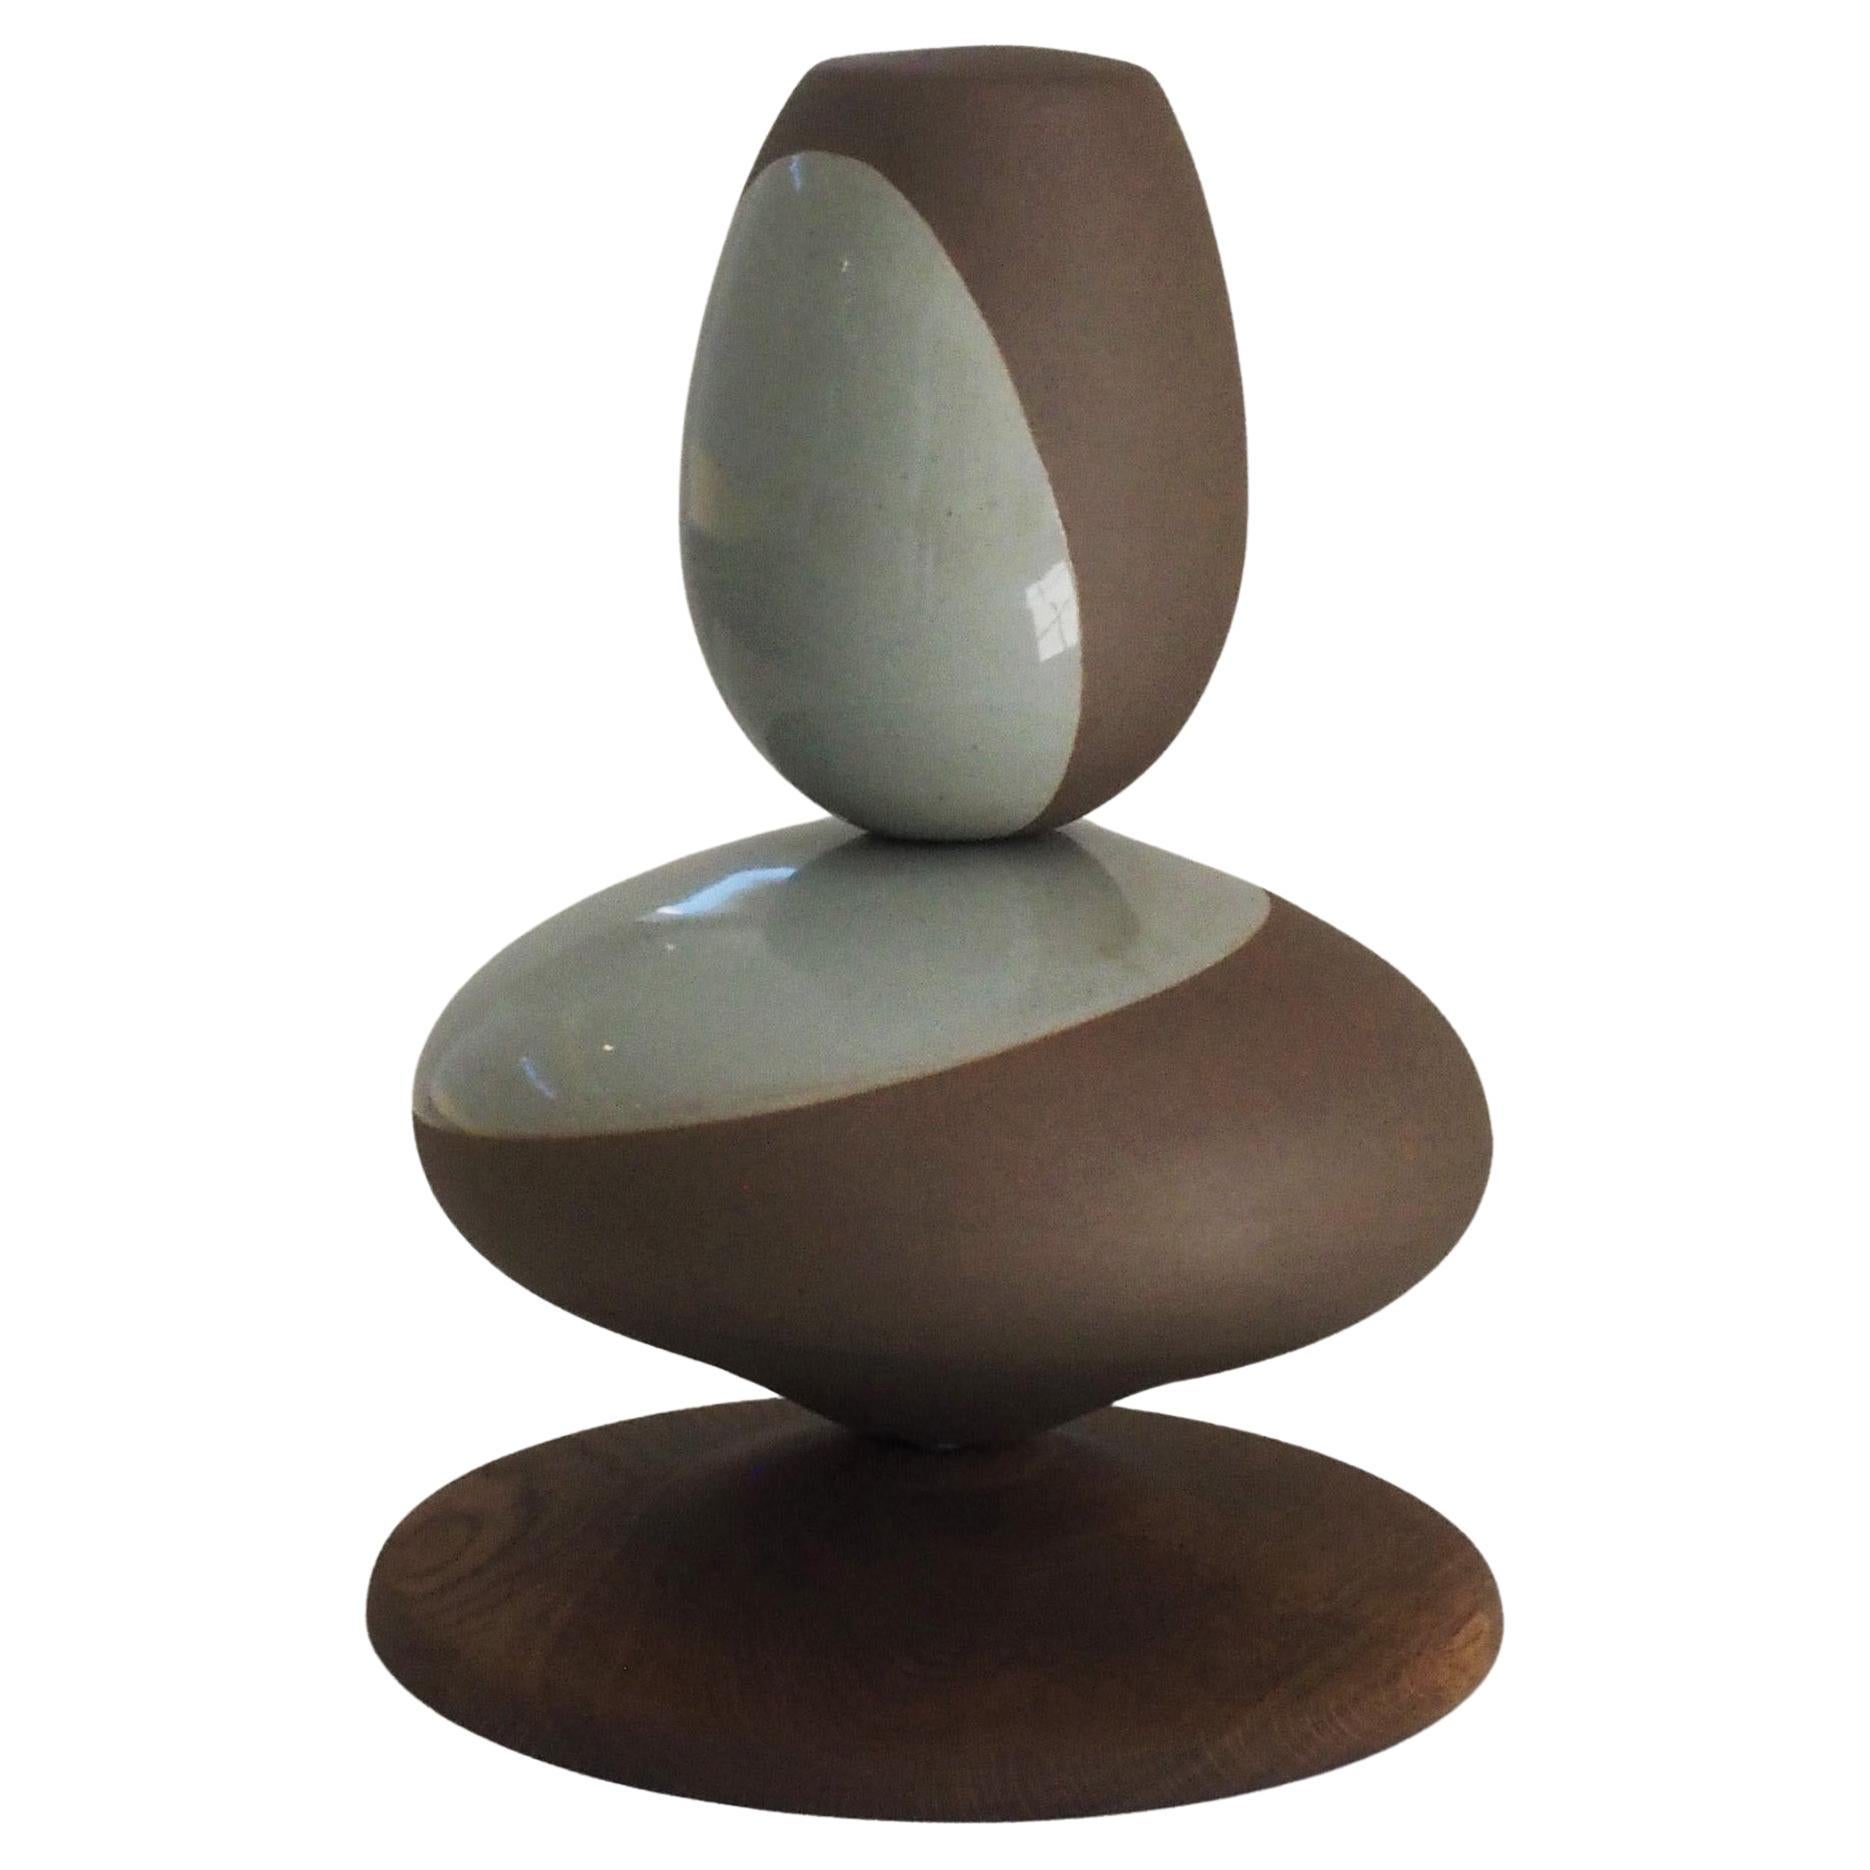 Contemporary Korean Ceramic, "Stack Sculpture 3.0" by Soo Joo For Sale